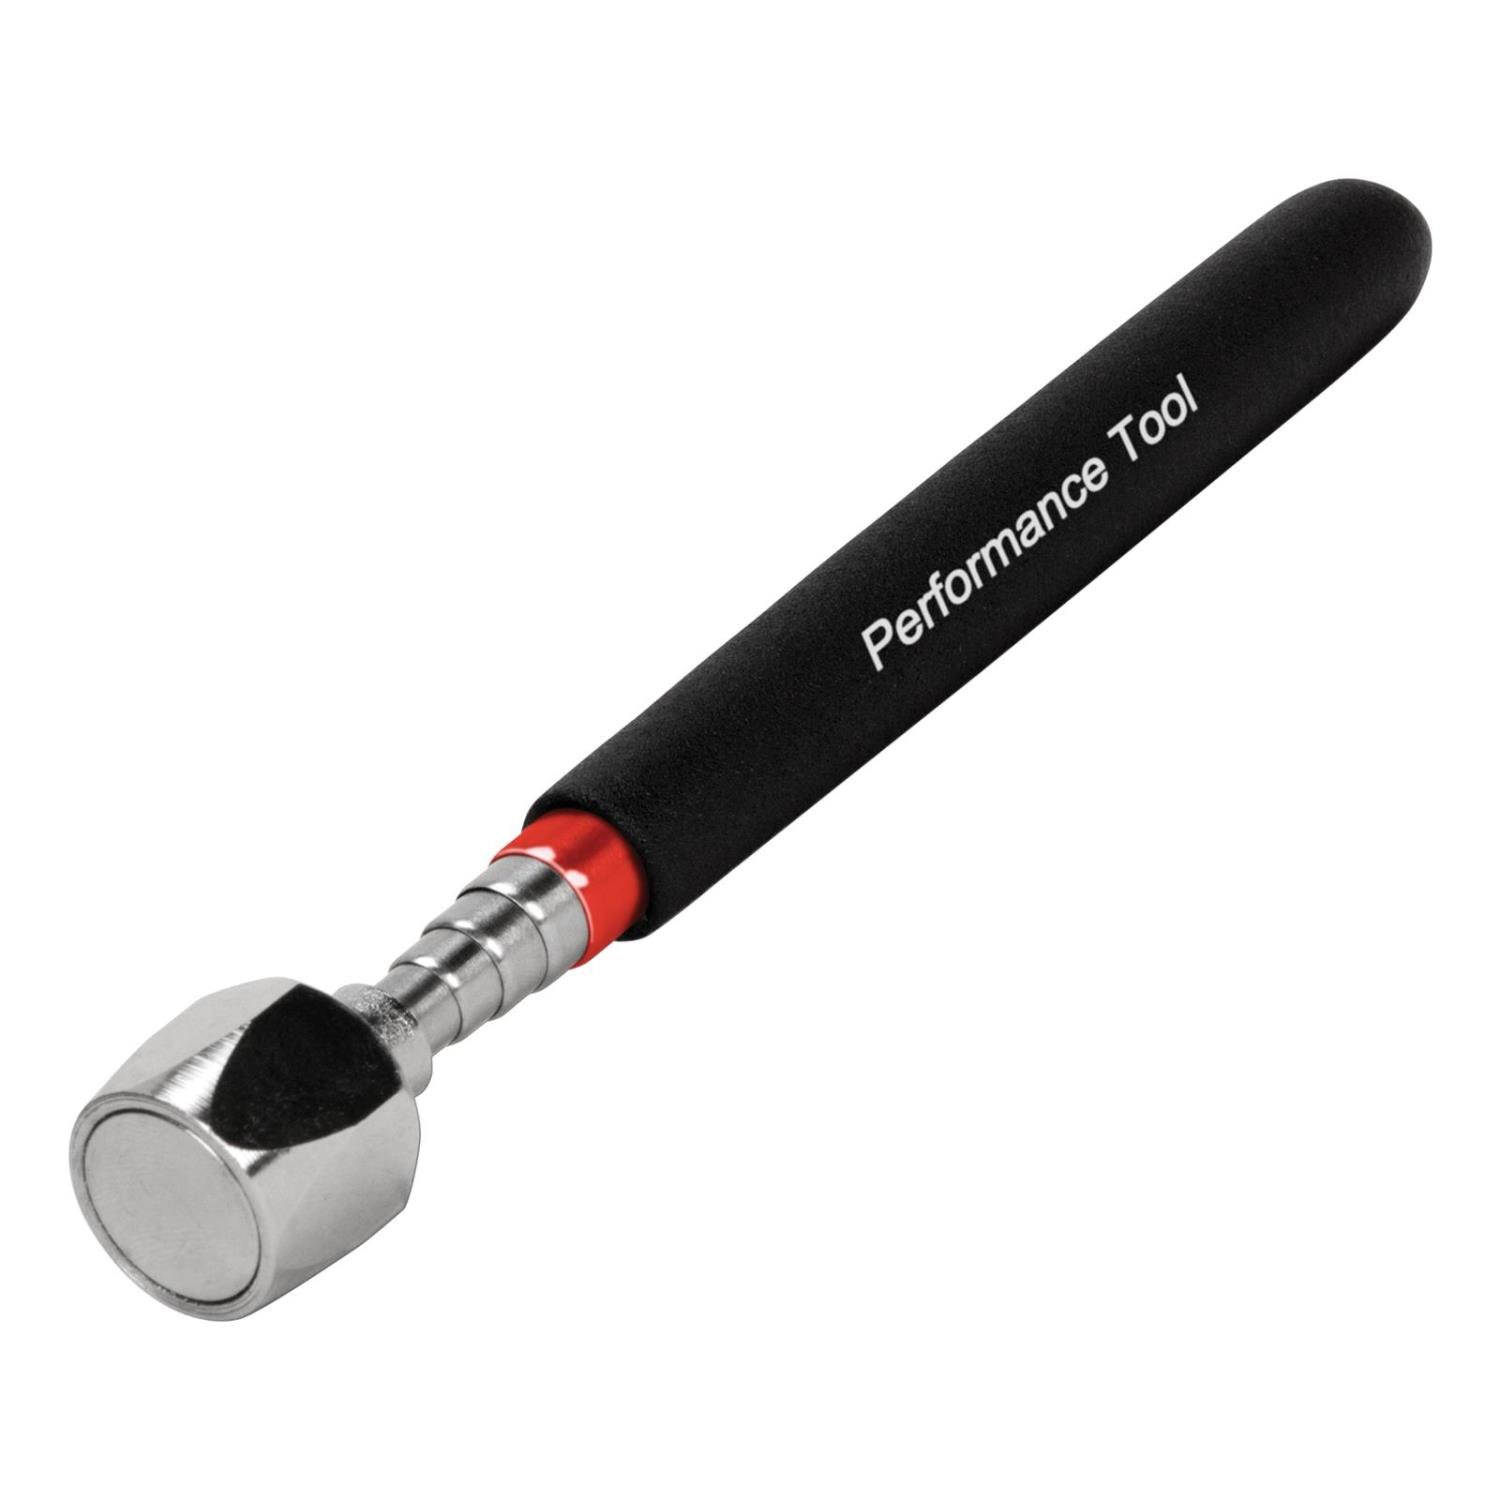 Magnetic Pickup Tool Retrieves up to 16lbs